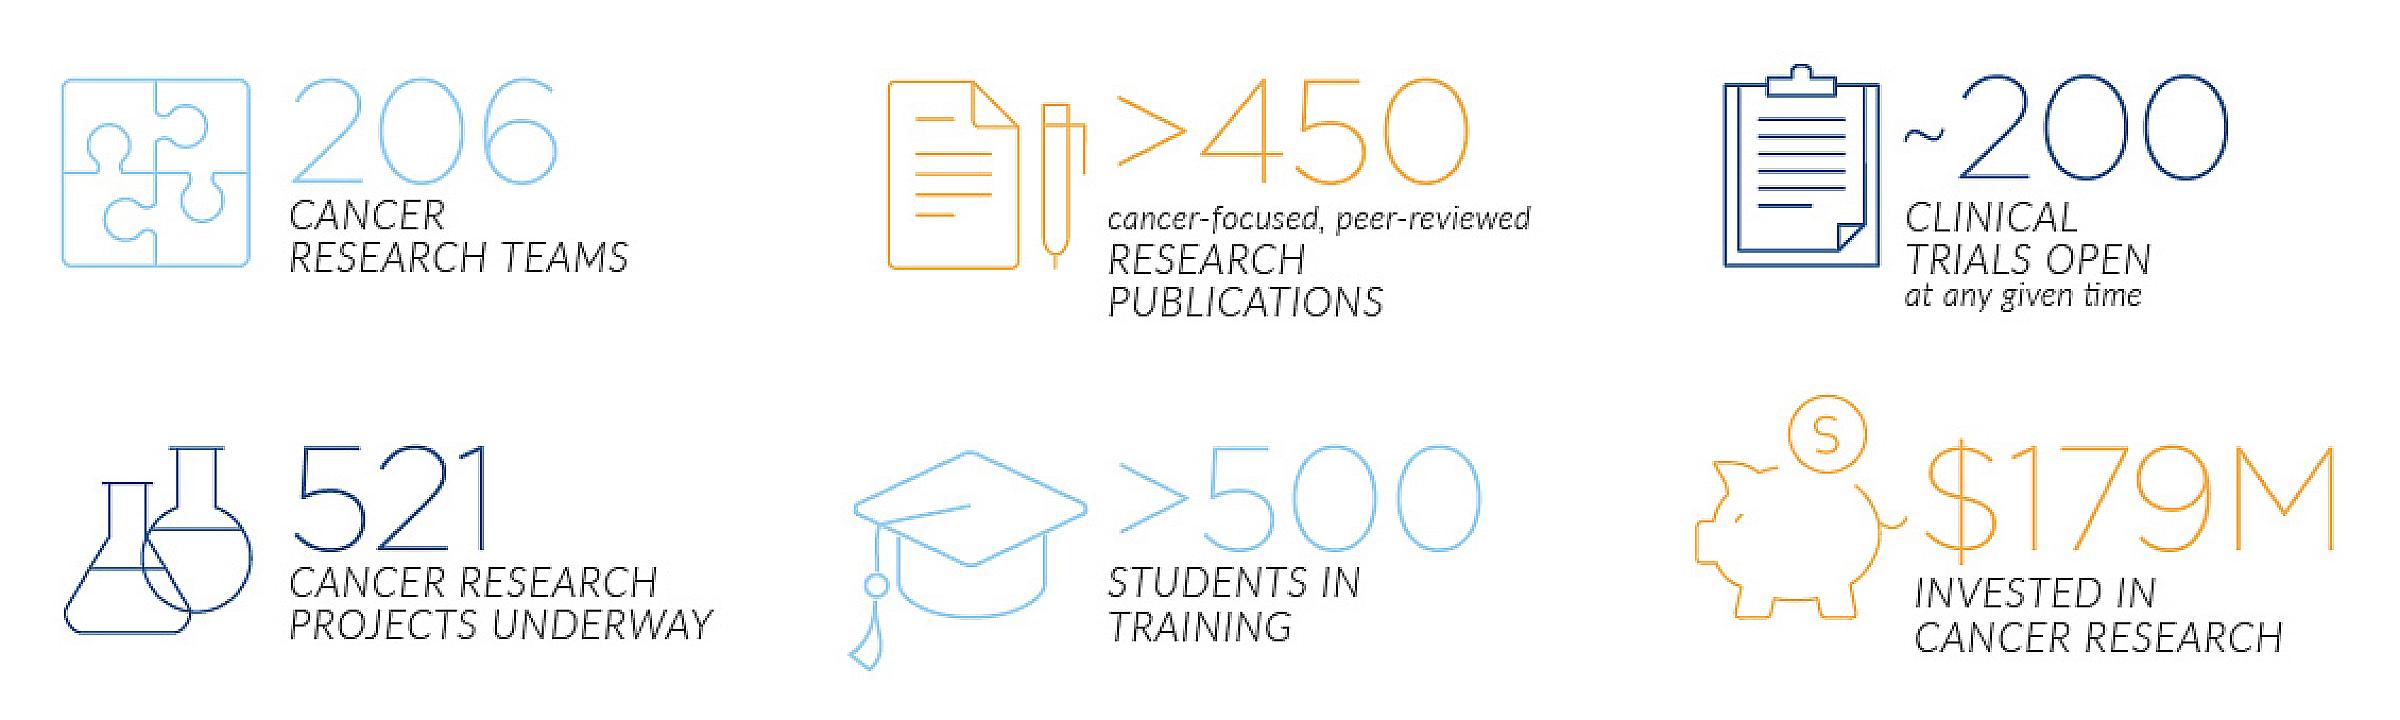 research infographic by the numbers